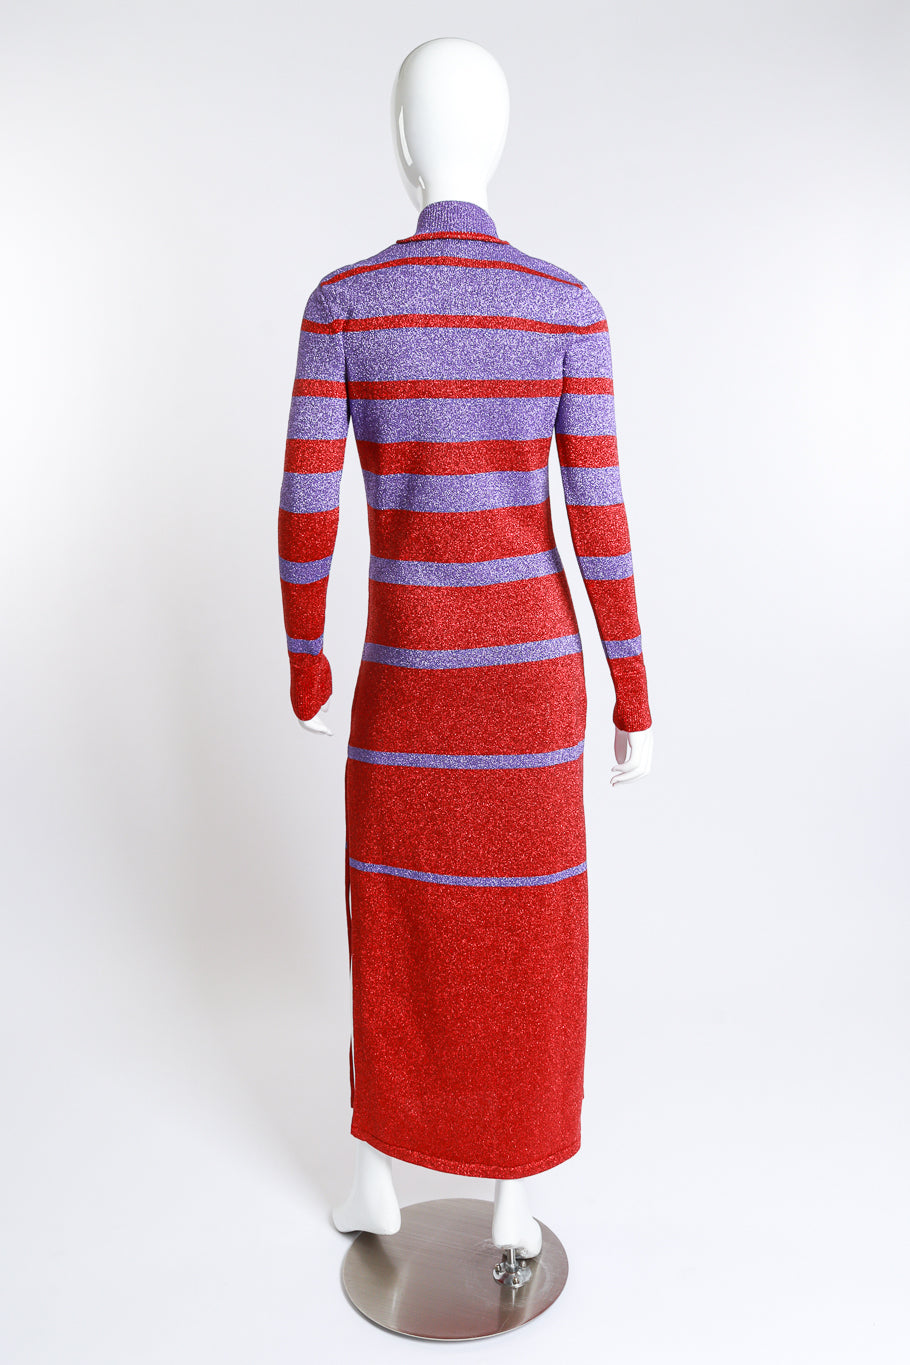 Paco Rabanne Striped Metallic Knit Maxi Dress on mannequin back view at Recess LA